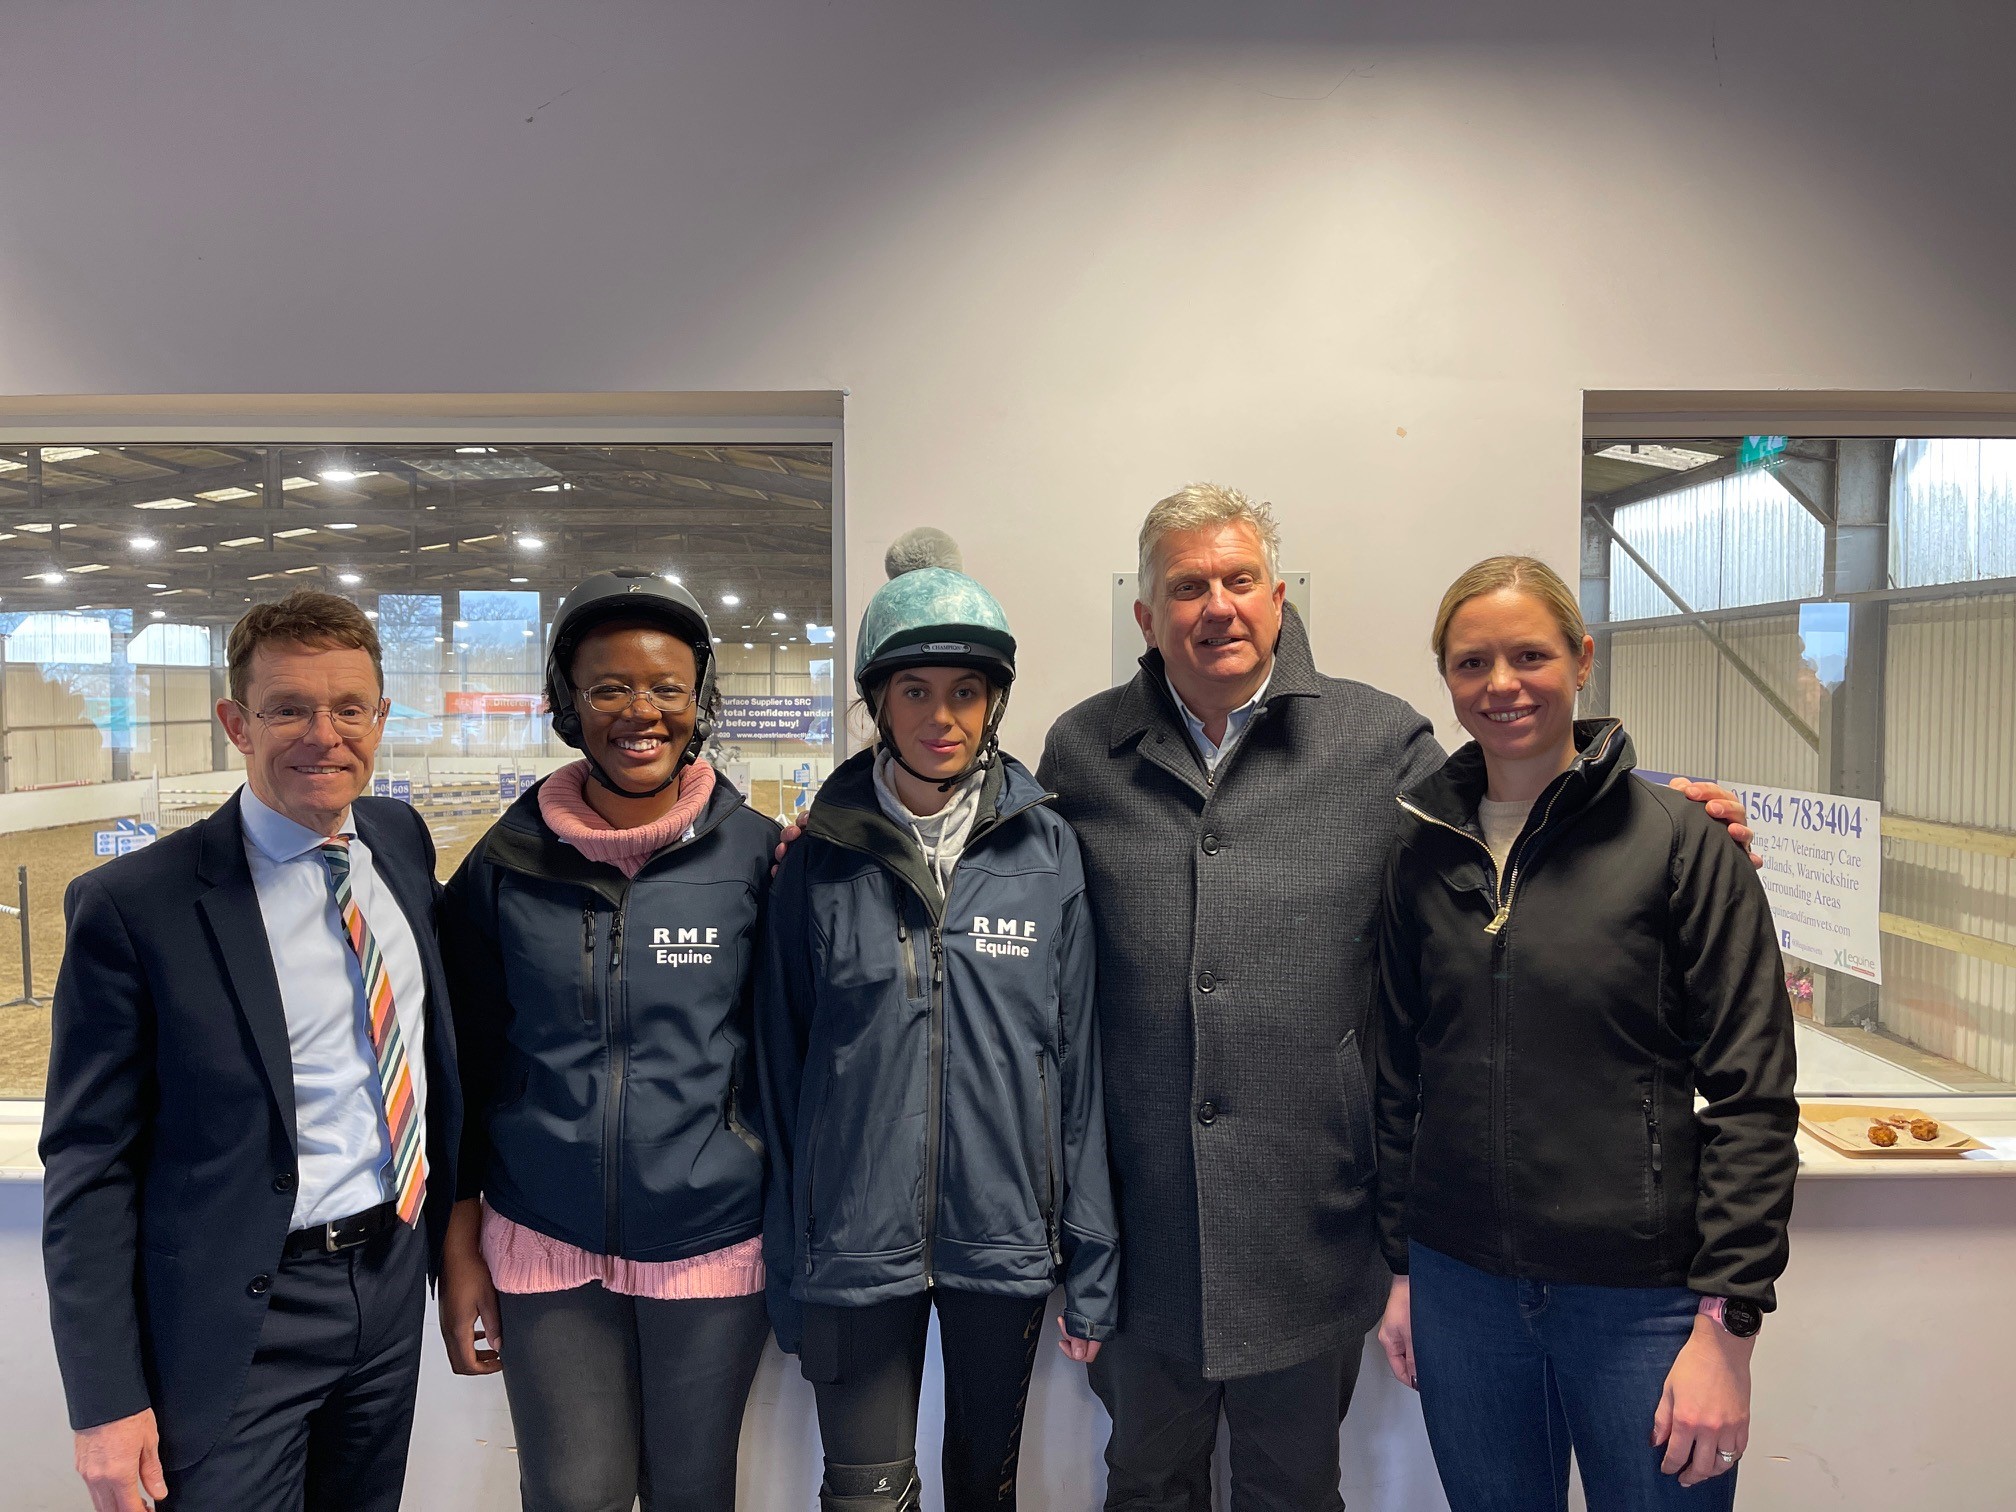 Image (L-R): Andy Street, Mayor of the West Midlands, alongside learners Hadiya Webster and Emily Kirk, Milton Harris from Milton Harris Racing and Ellie Spelman from Solihull Riding Club.